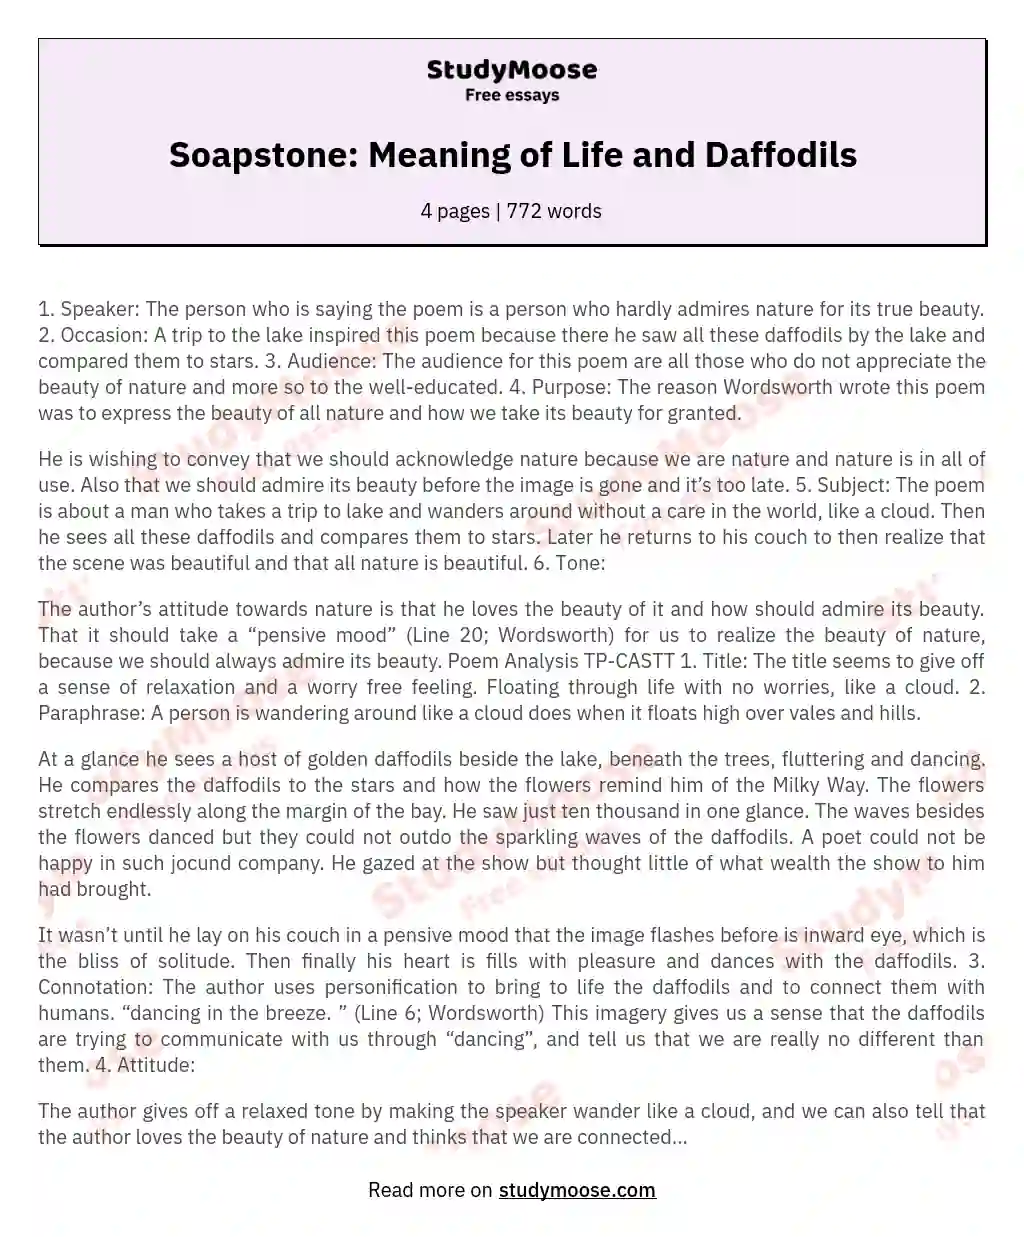 Soapstone: Meaning of Life and Daffodils essay